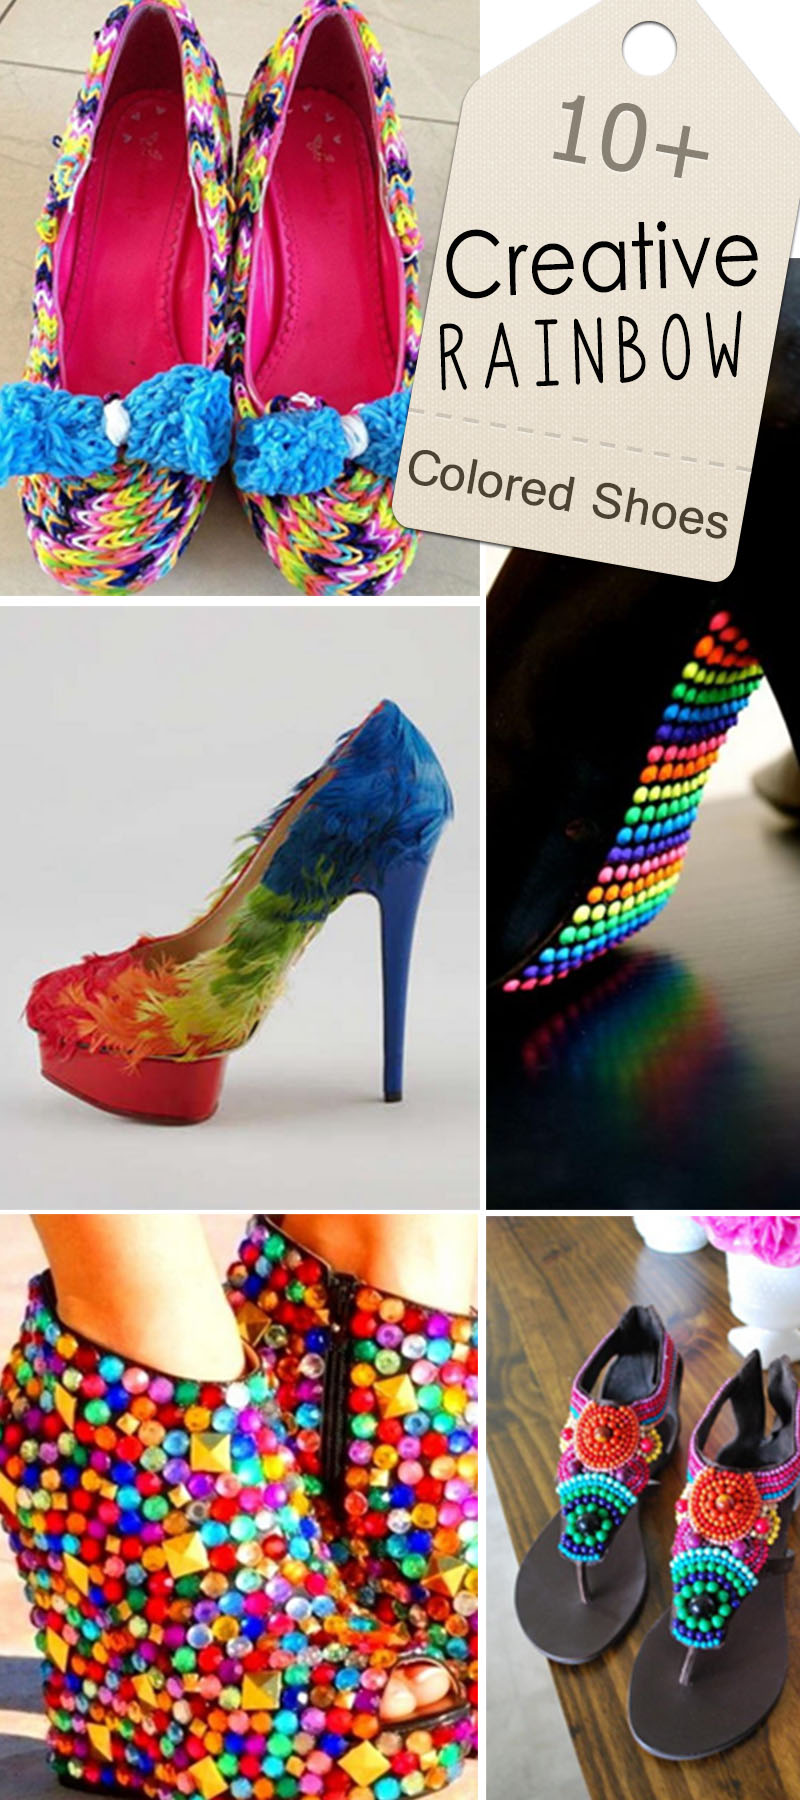 Creative Rainbow Colored Shoes!